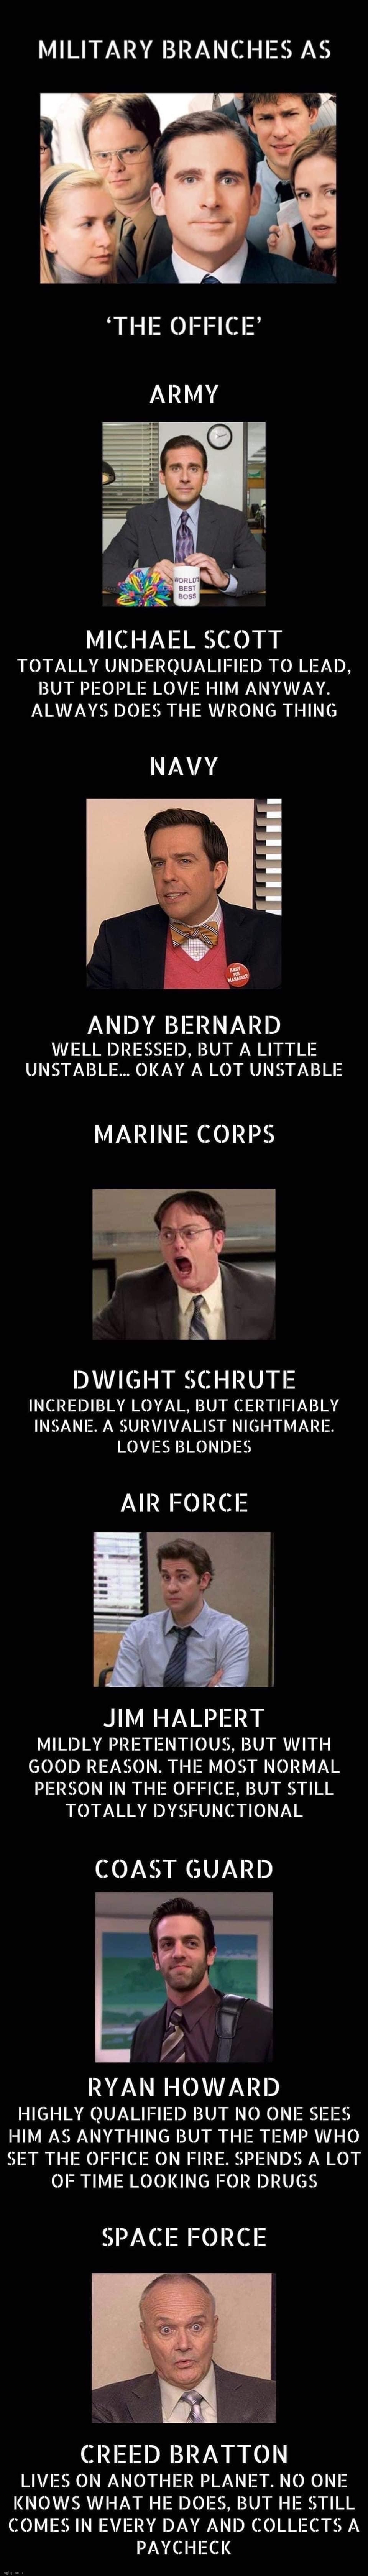 lmfao | image tagged in the office,military,repost,reposts,reposts are awesome,army | made w/ Imgflip meme maker